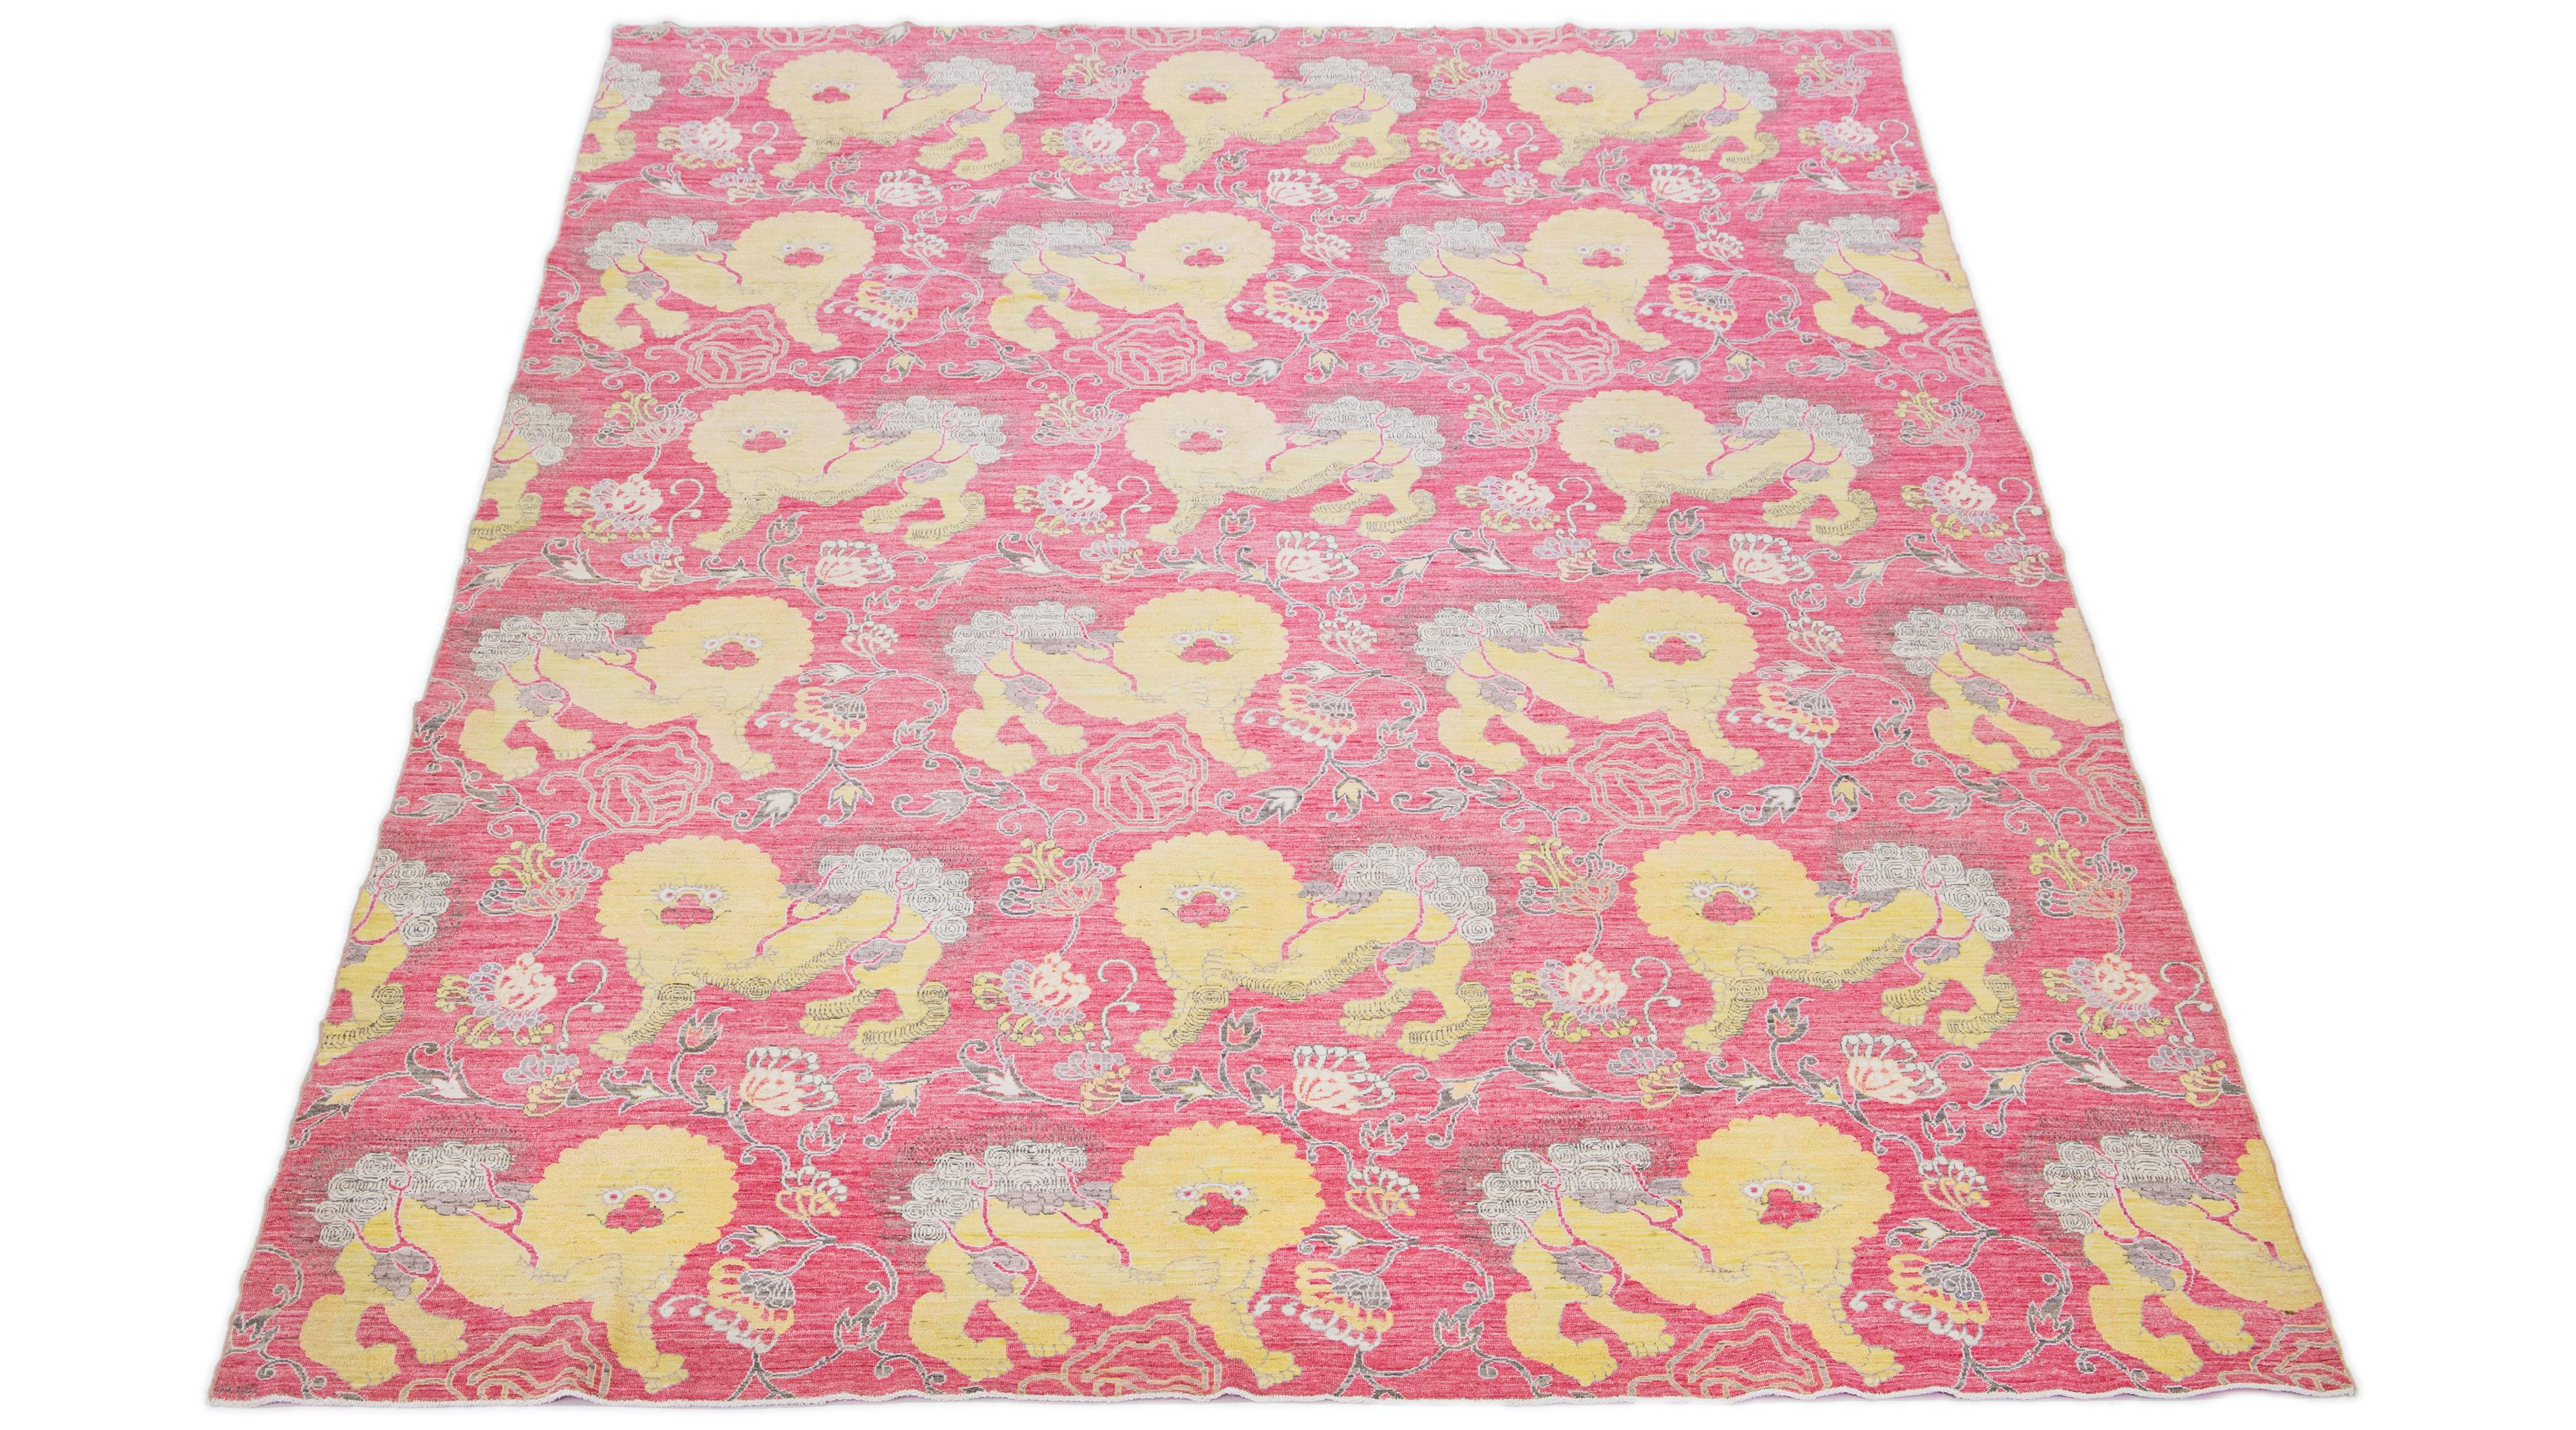 This hand-knotted wool rug showcases an exquisite Modern Art Deco design with a rich pink field accentuated by broad yellow and gray hues. The intricate Chinese-style foo dogs are beautifully depicted throughout the rug, embellished with